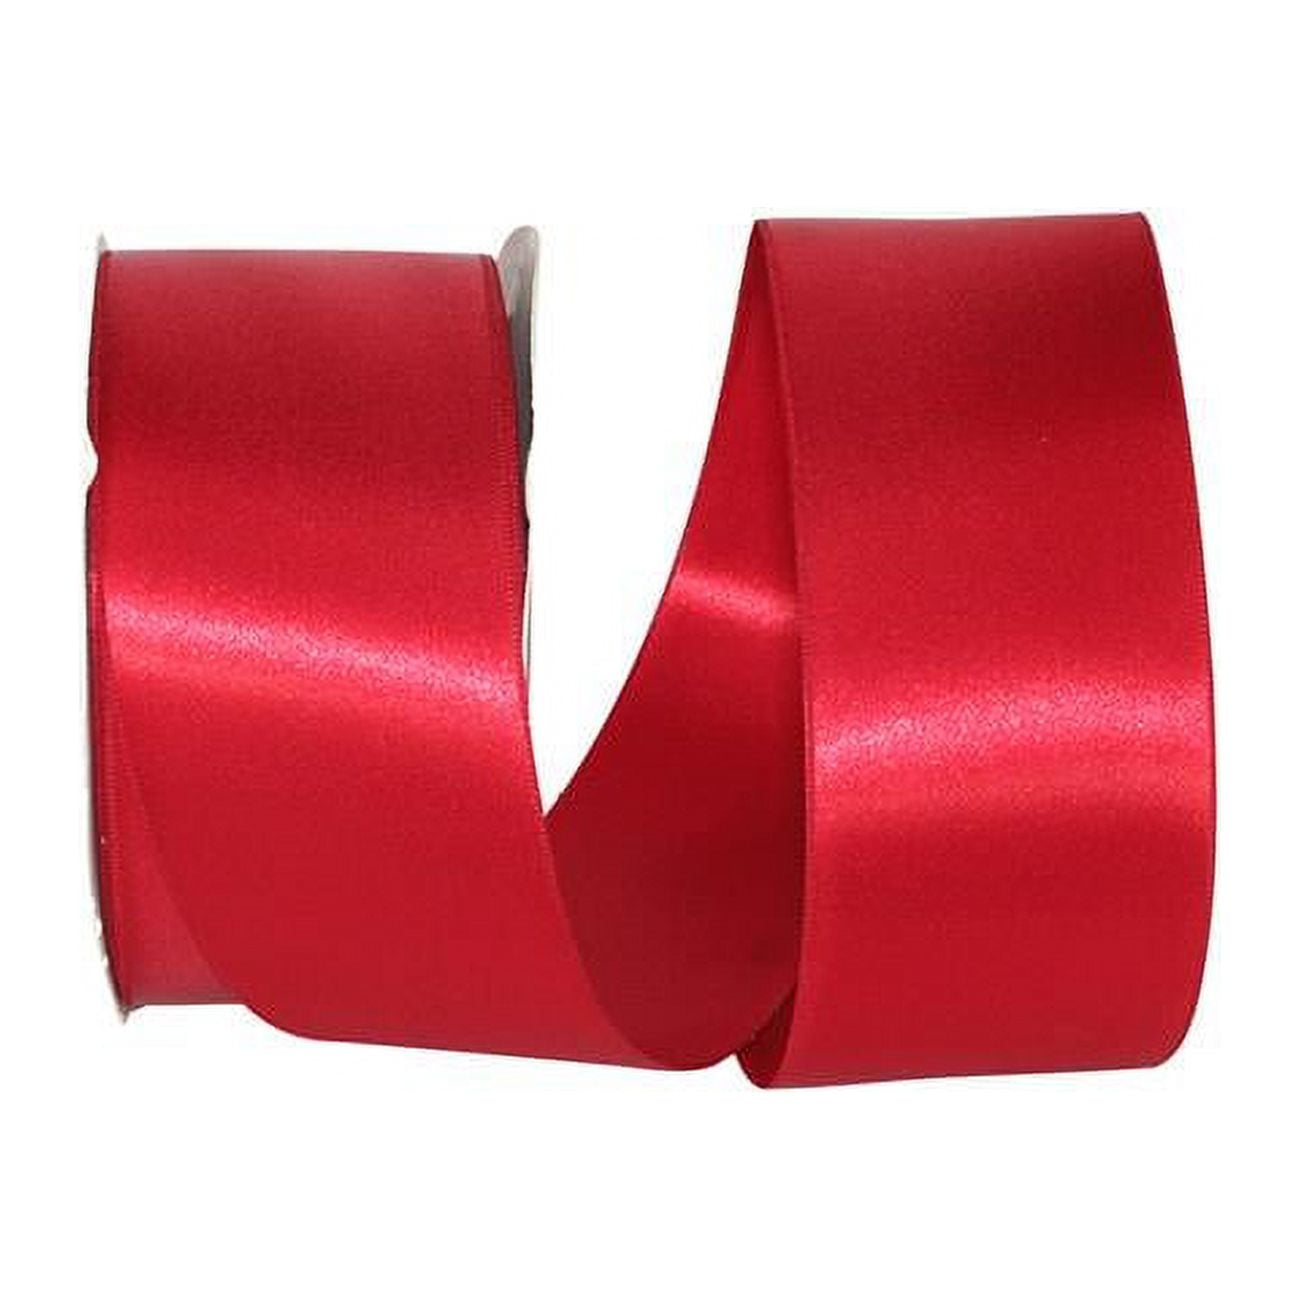 Reliant Ribbon - 5000-908-09C, Double Face Satin Charm Dfs Ribbon, Scarlet,  1-1/2 Inch, 100 Yards 